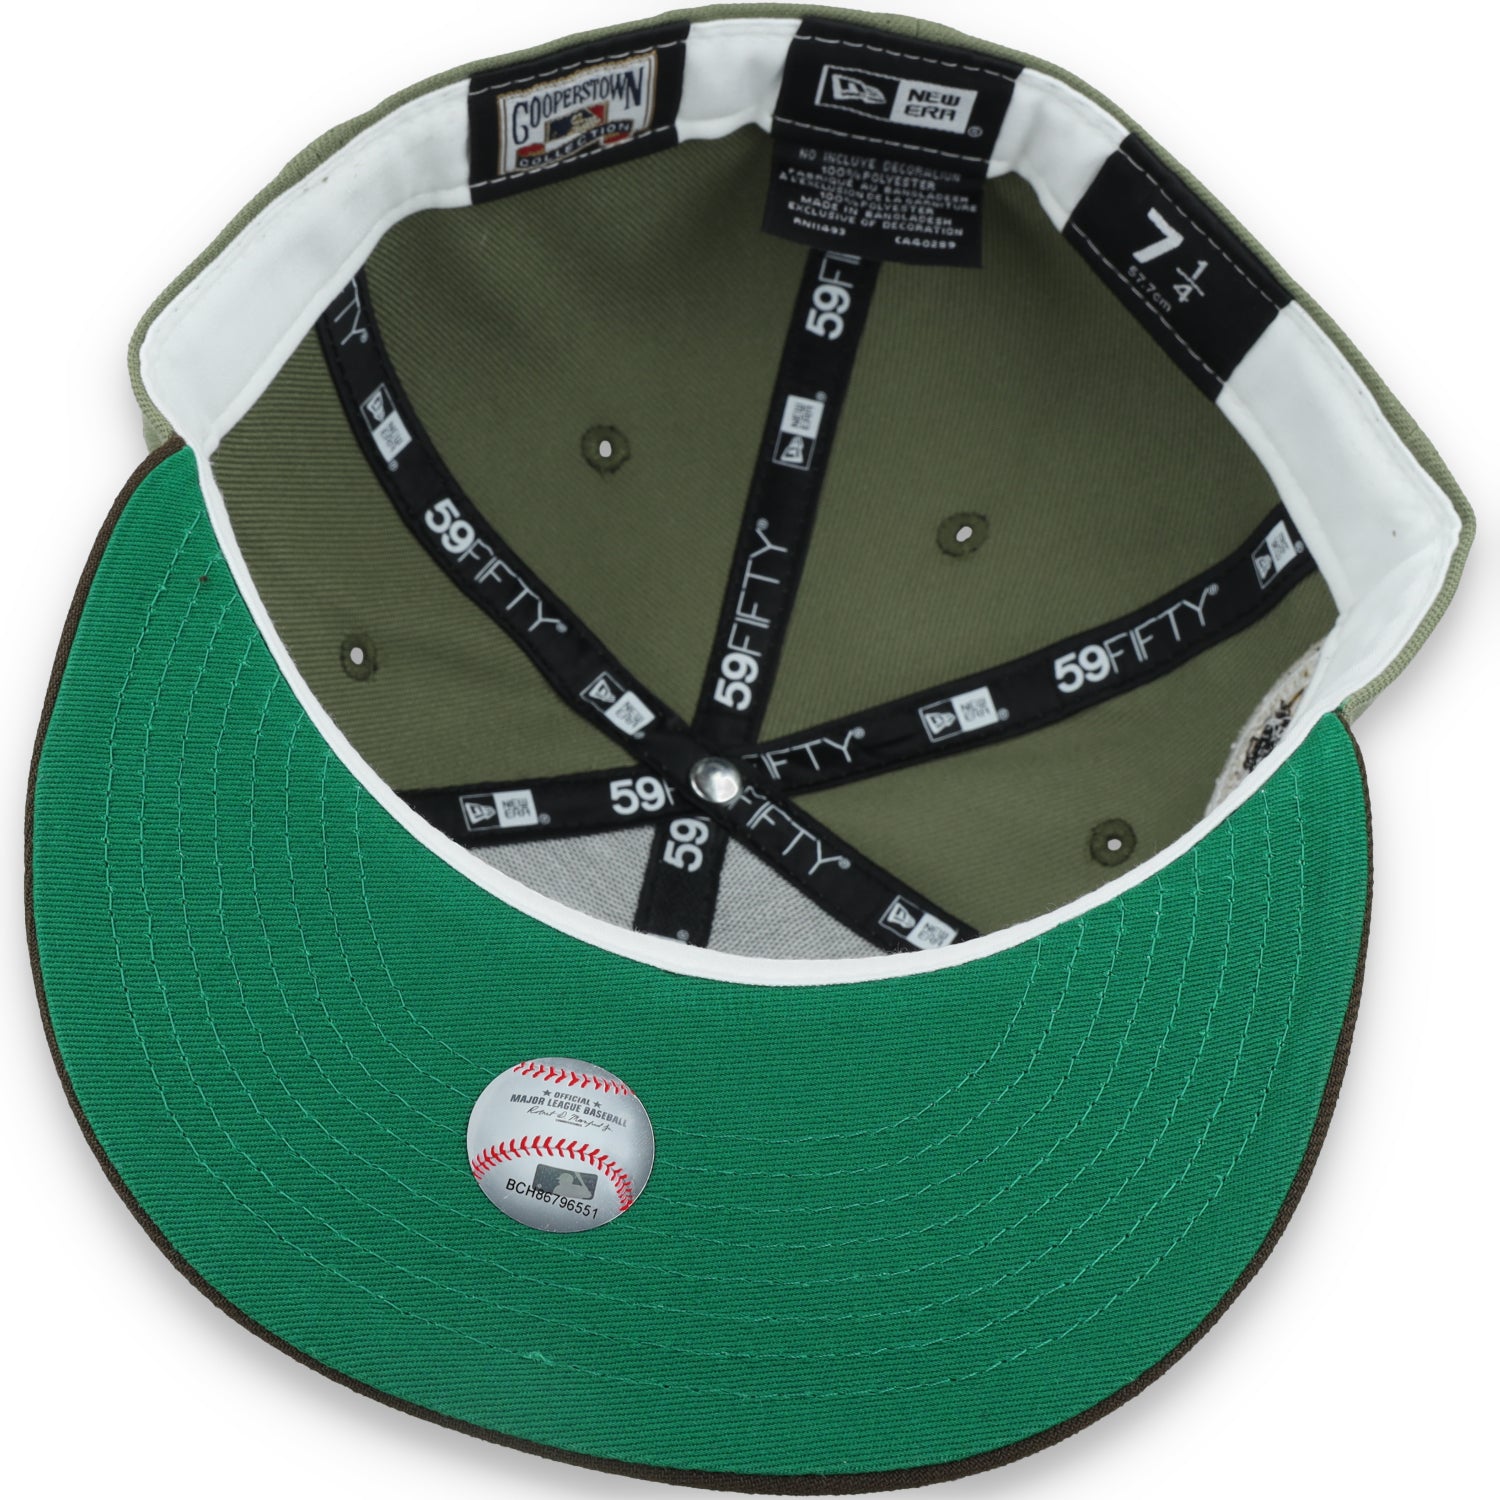 New Era San Diego Padres 40th Anniversary Side Patch 59FIFTY Fitted Hat- Olive Green